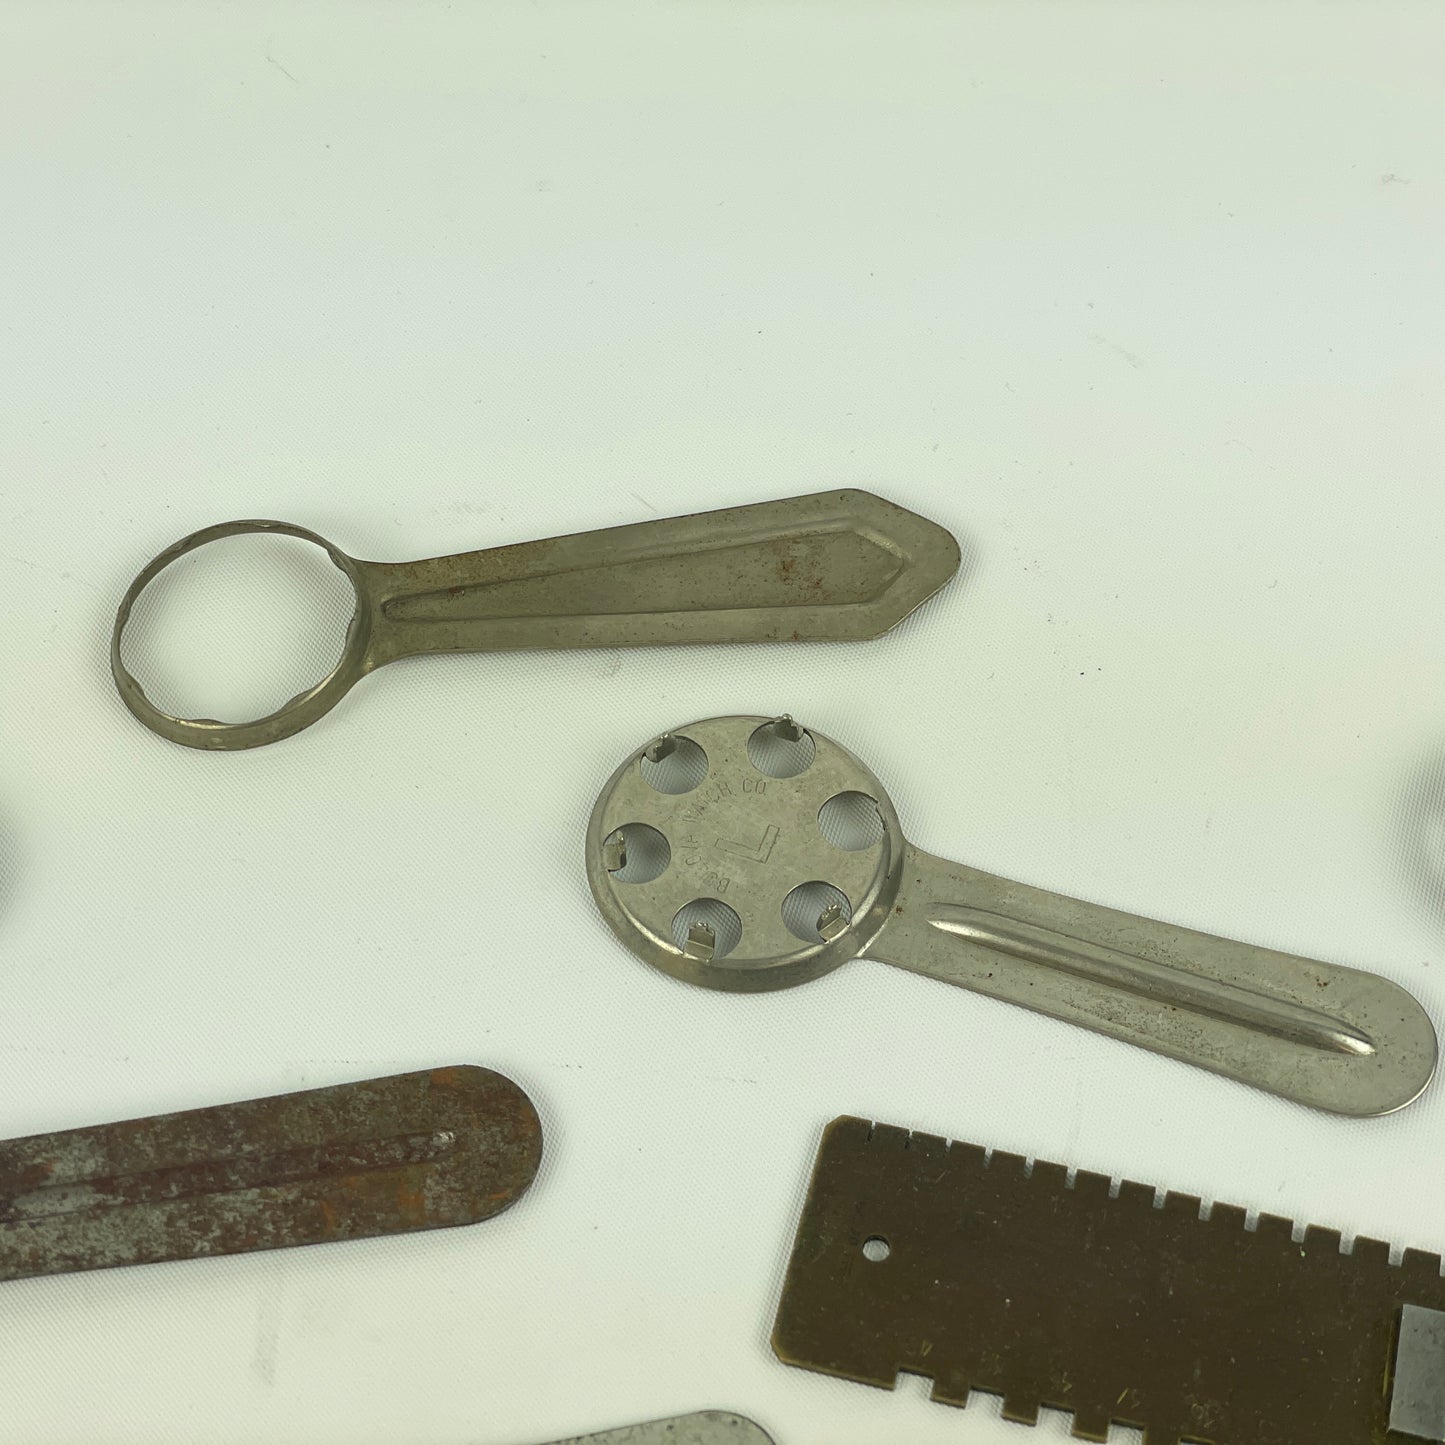 Jan Lot 135- Watchmaker’s Selection of Bench Tools